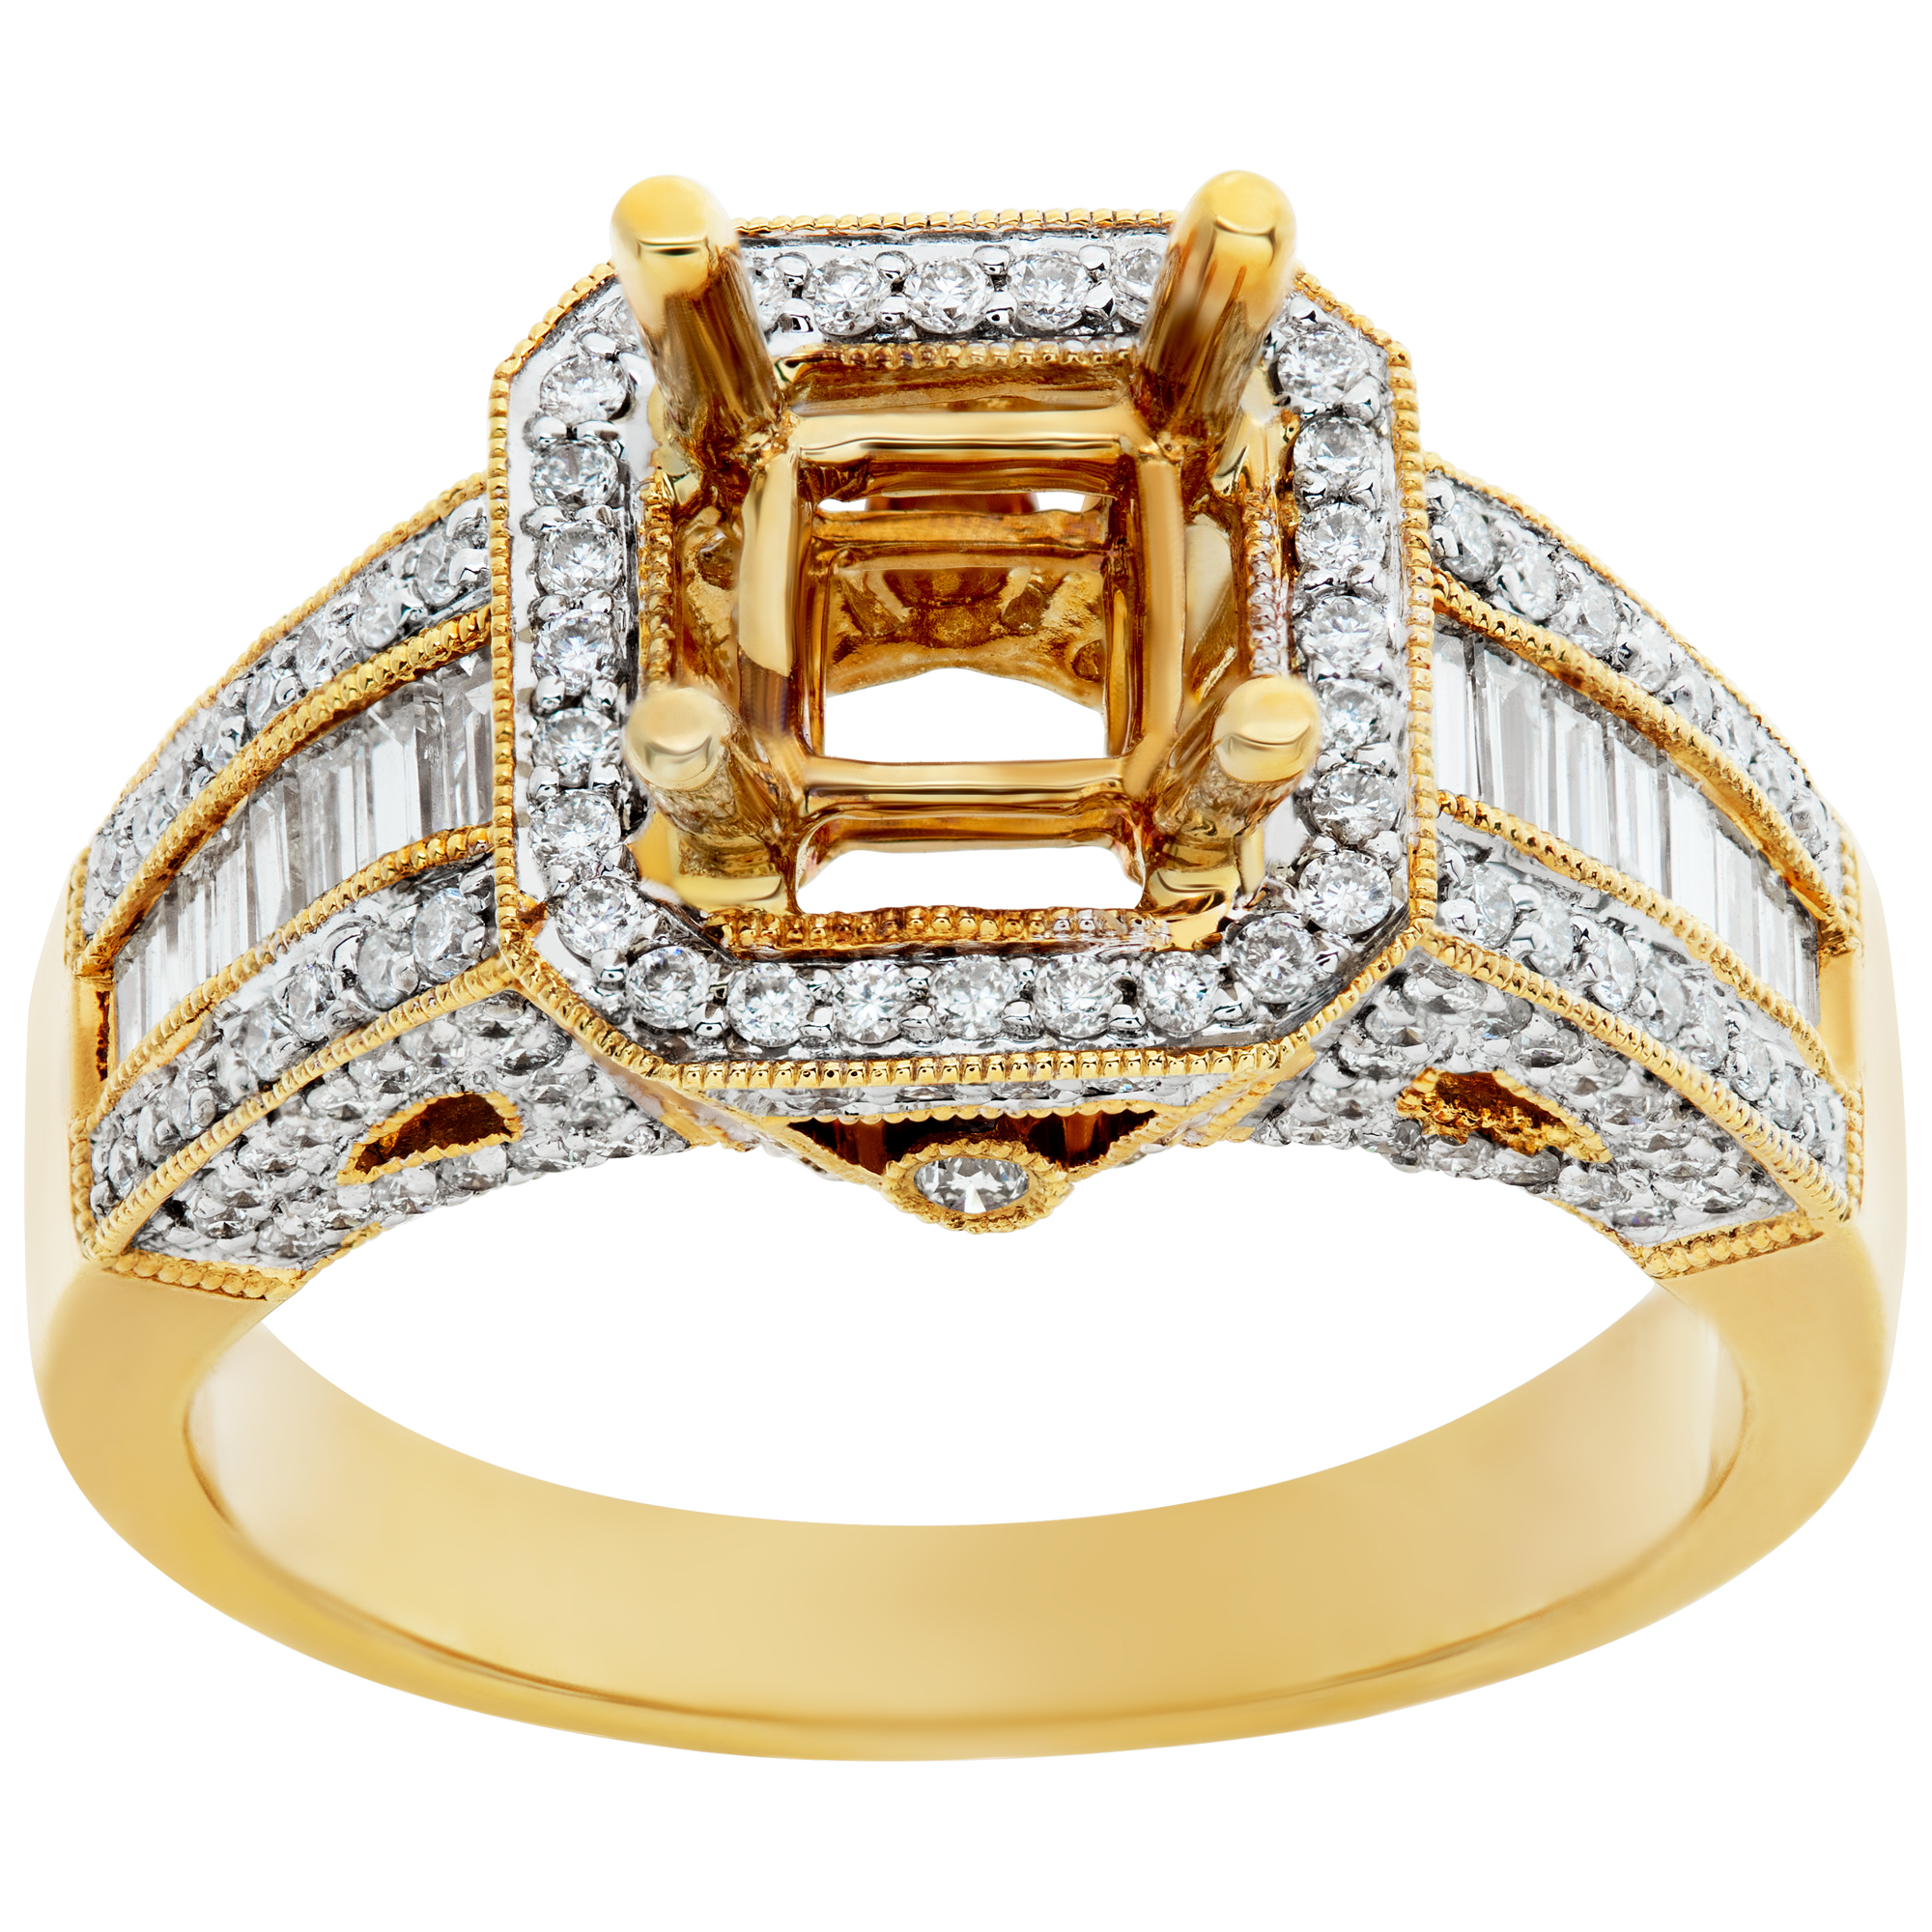 Diamond setting in 14k yellow gold; 0.90 carats in round & baguette diamonds. image 1